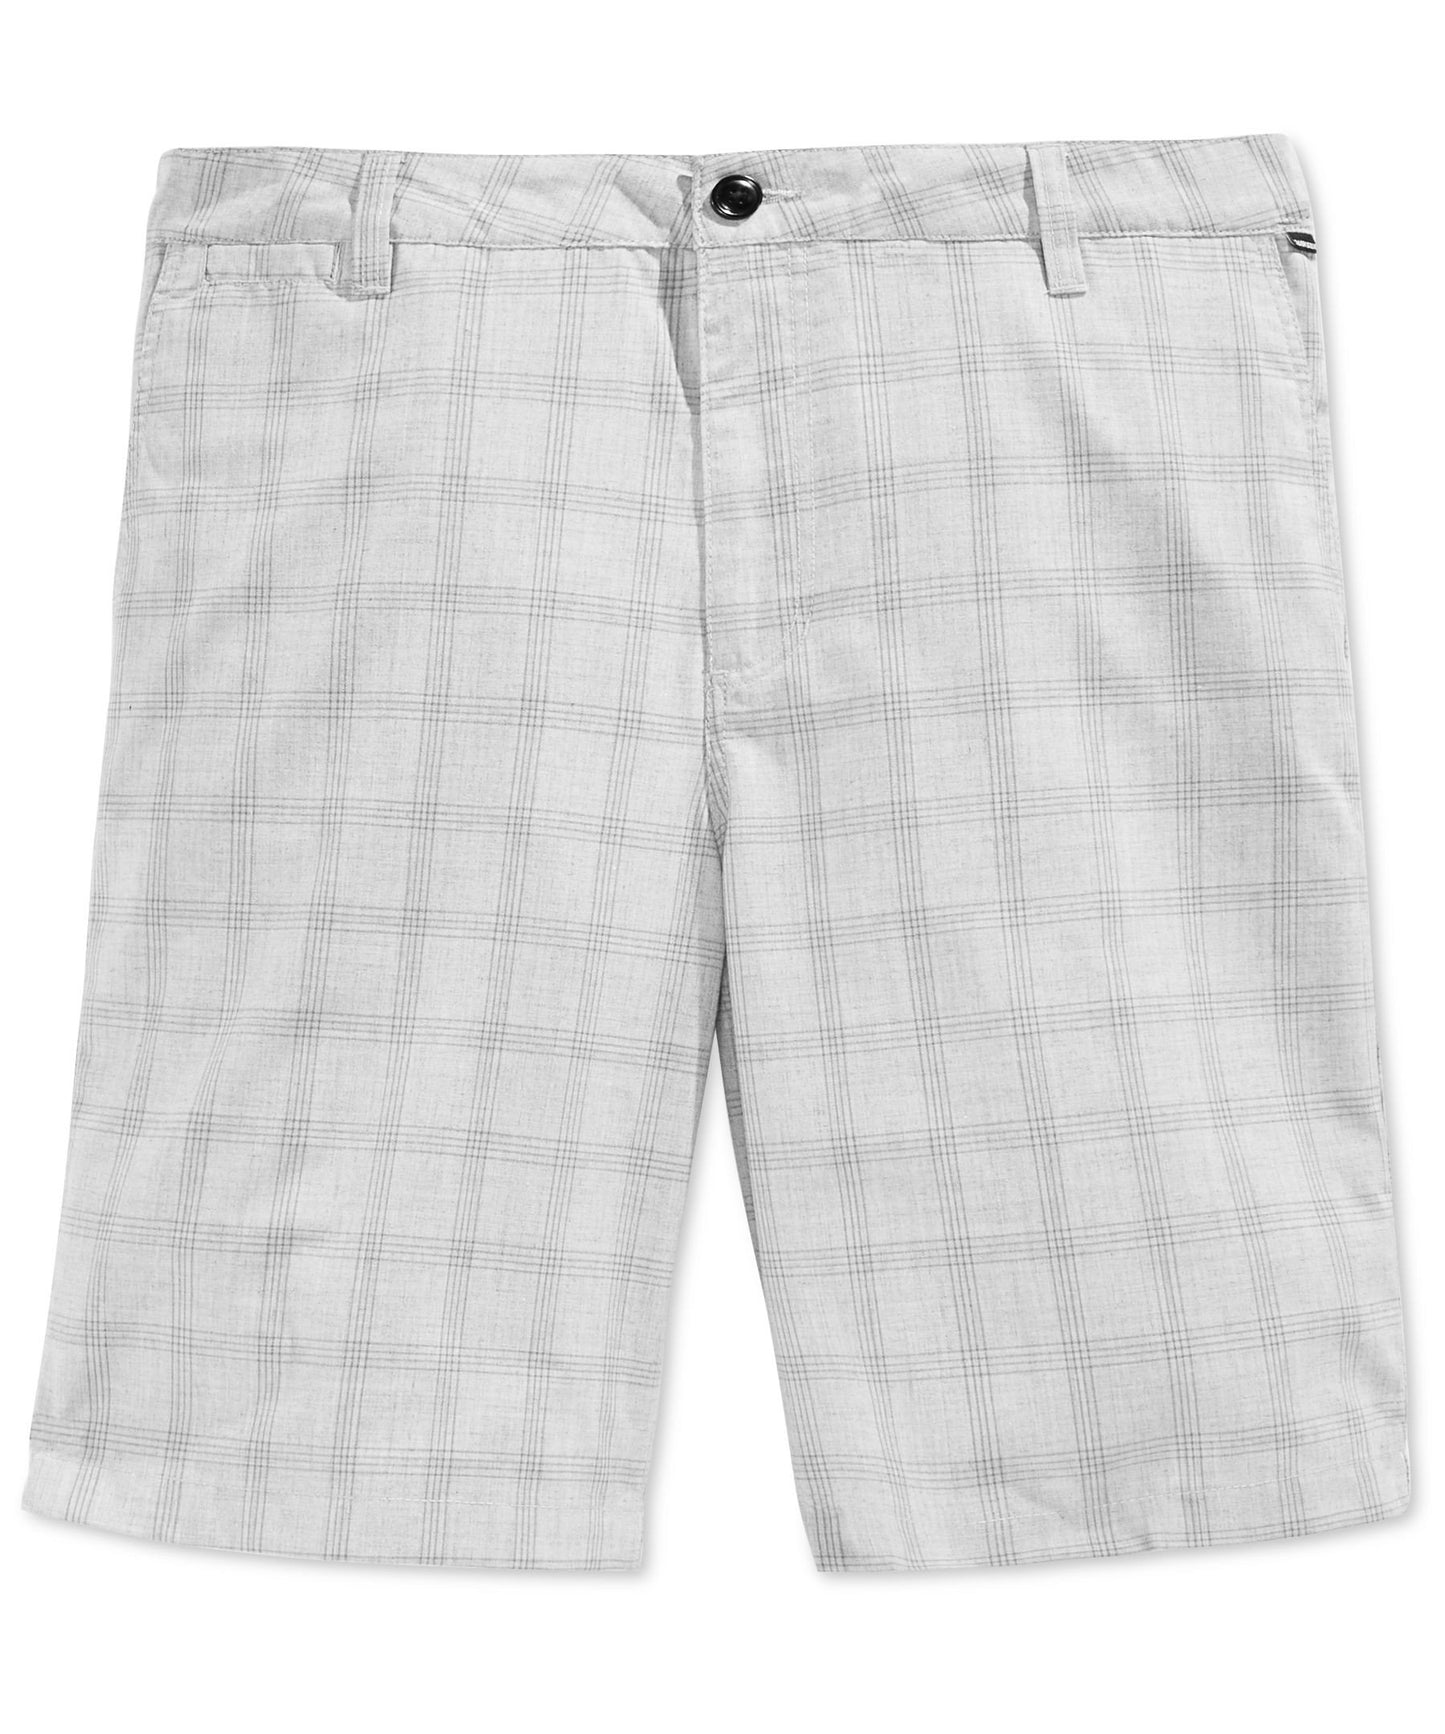 Quiksilver Men's To The Wall Plaid Short